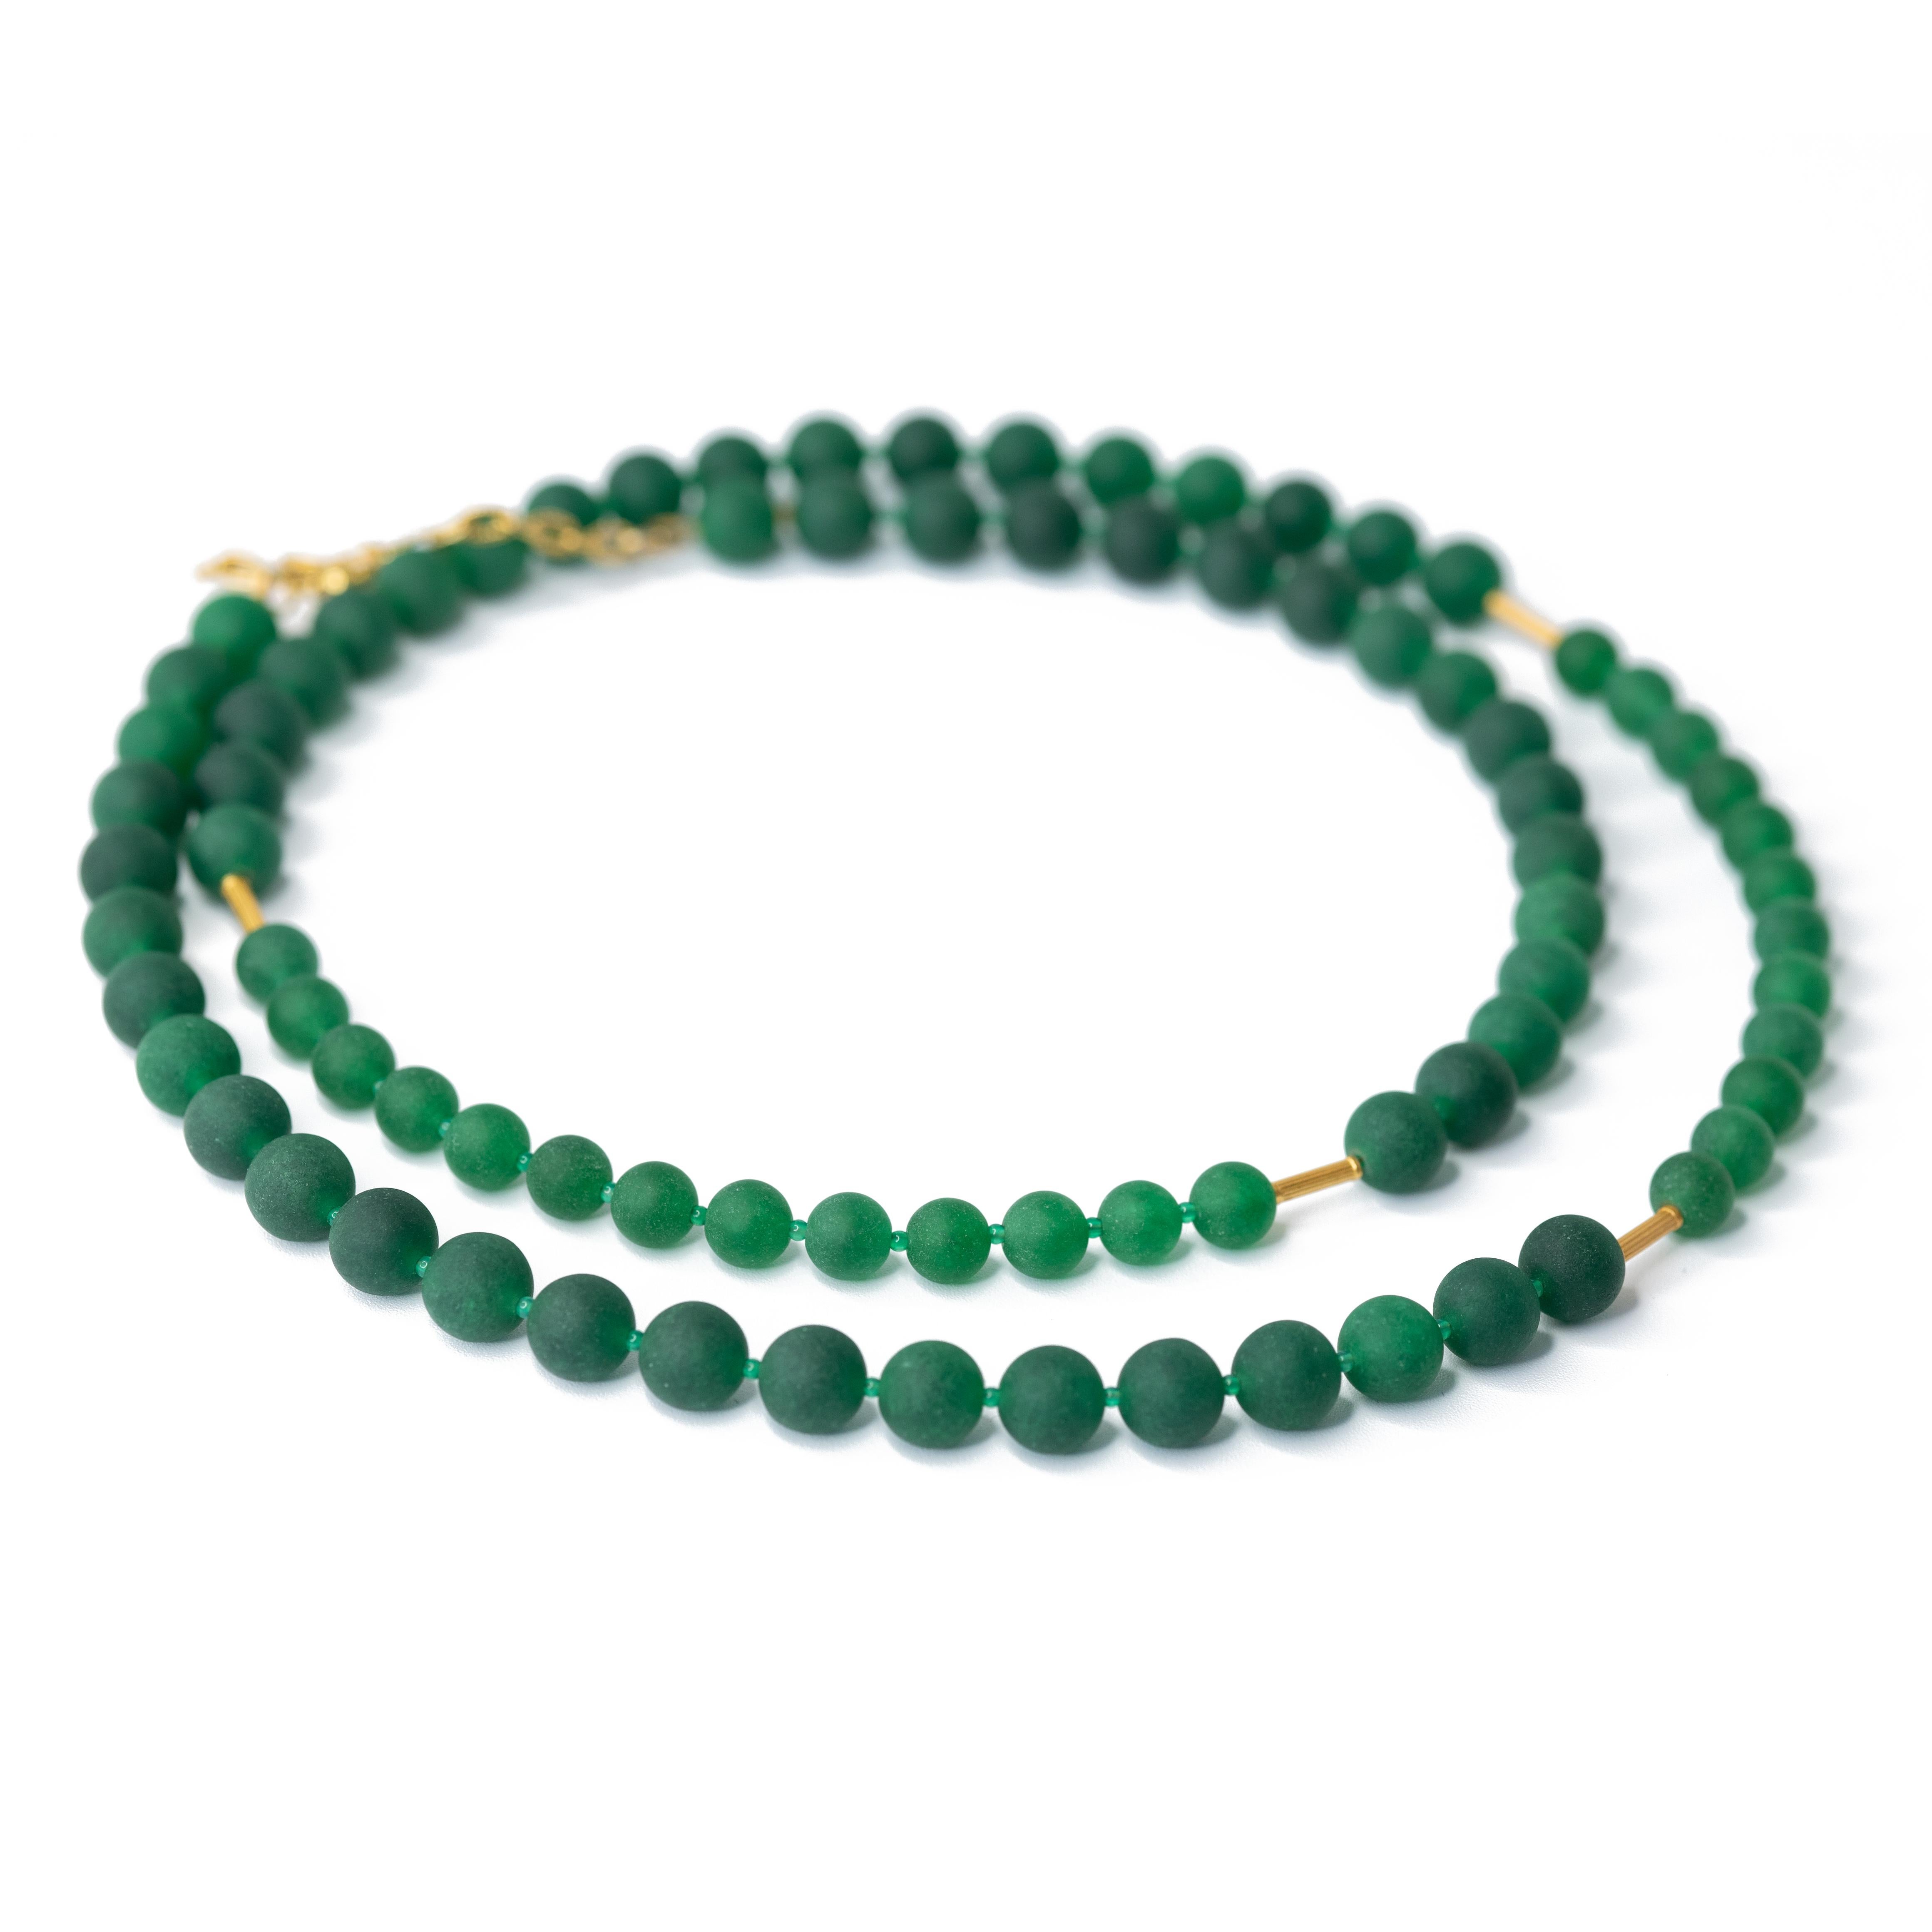 Green Chalcedony Beads and Gold Necklace -The Poet's Garden by Bombyx House For Sale 1